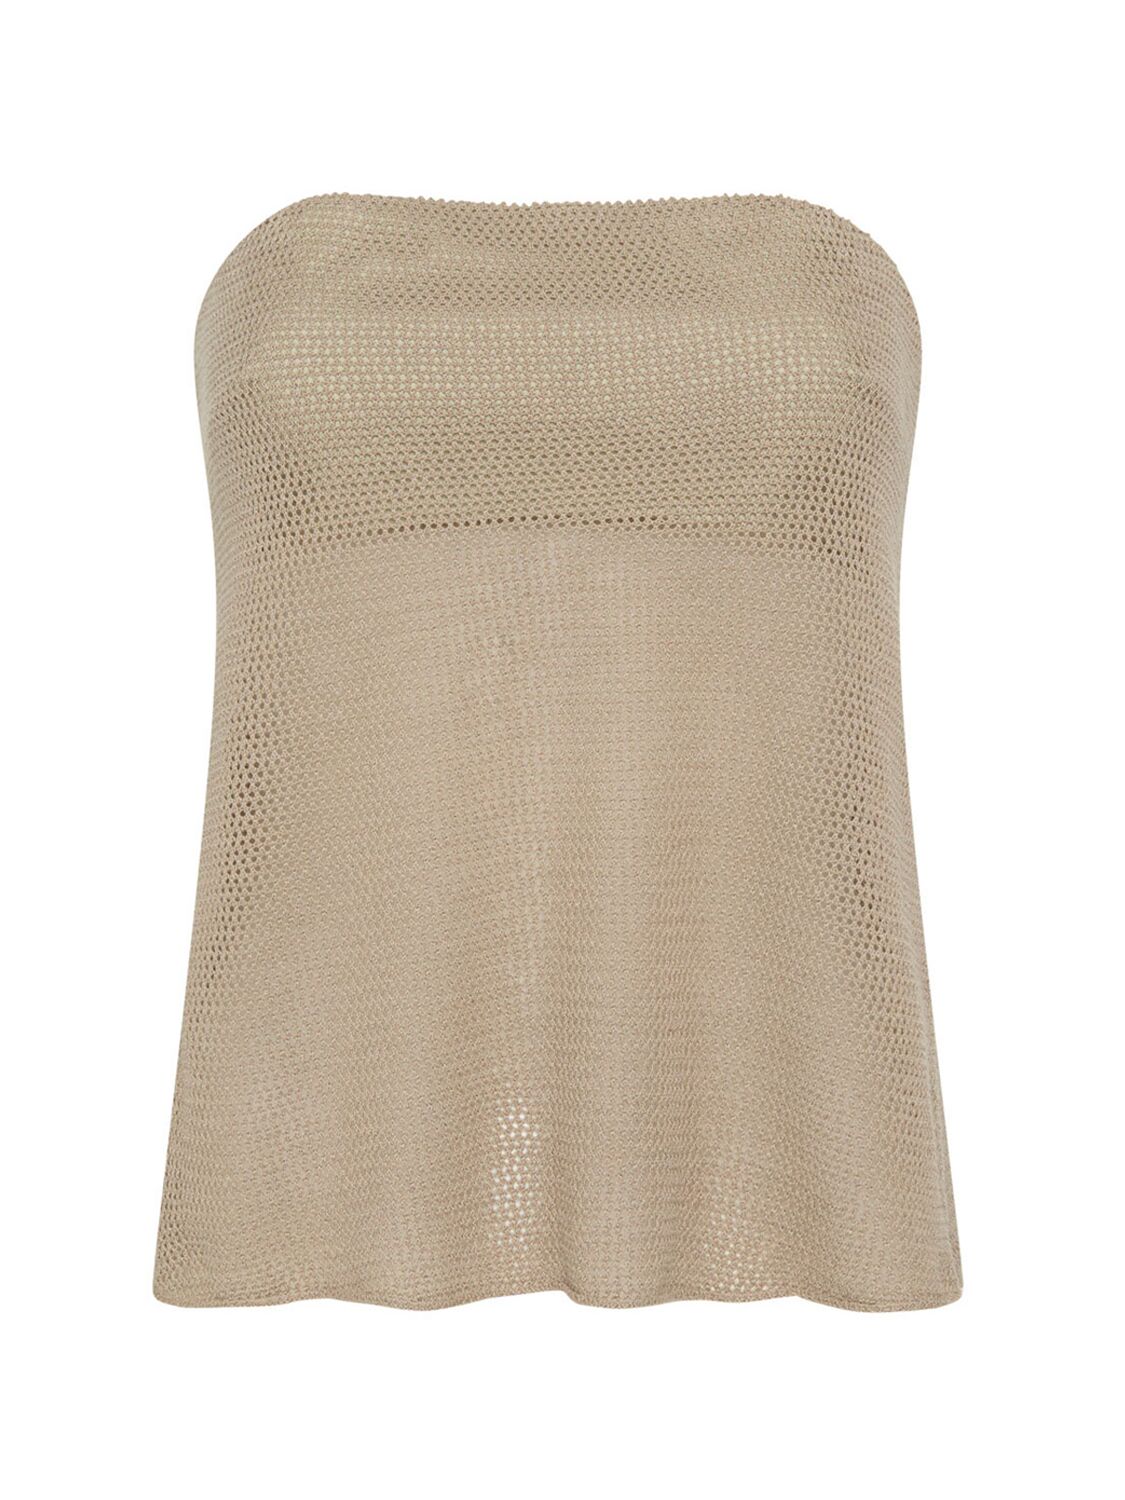 Image of Recycled Mesh Knit Tube Top